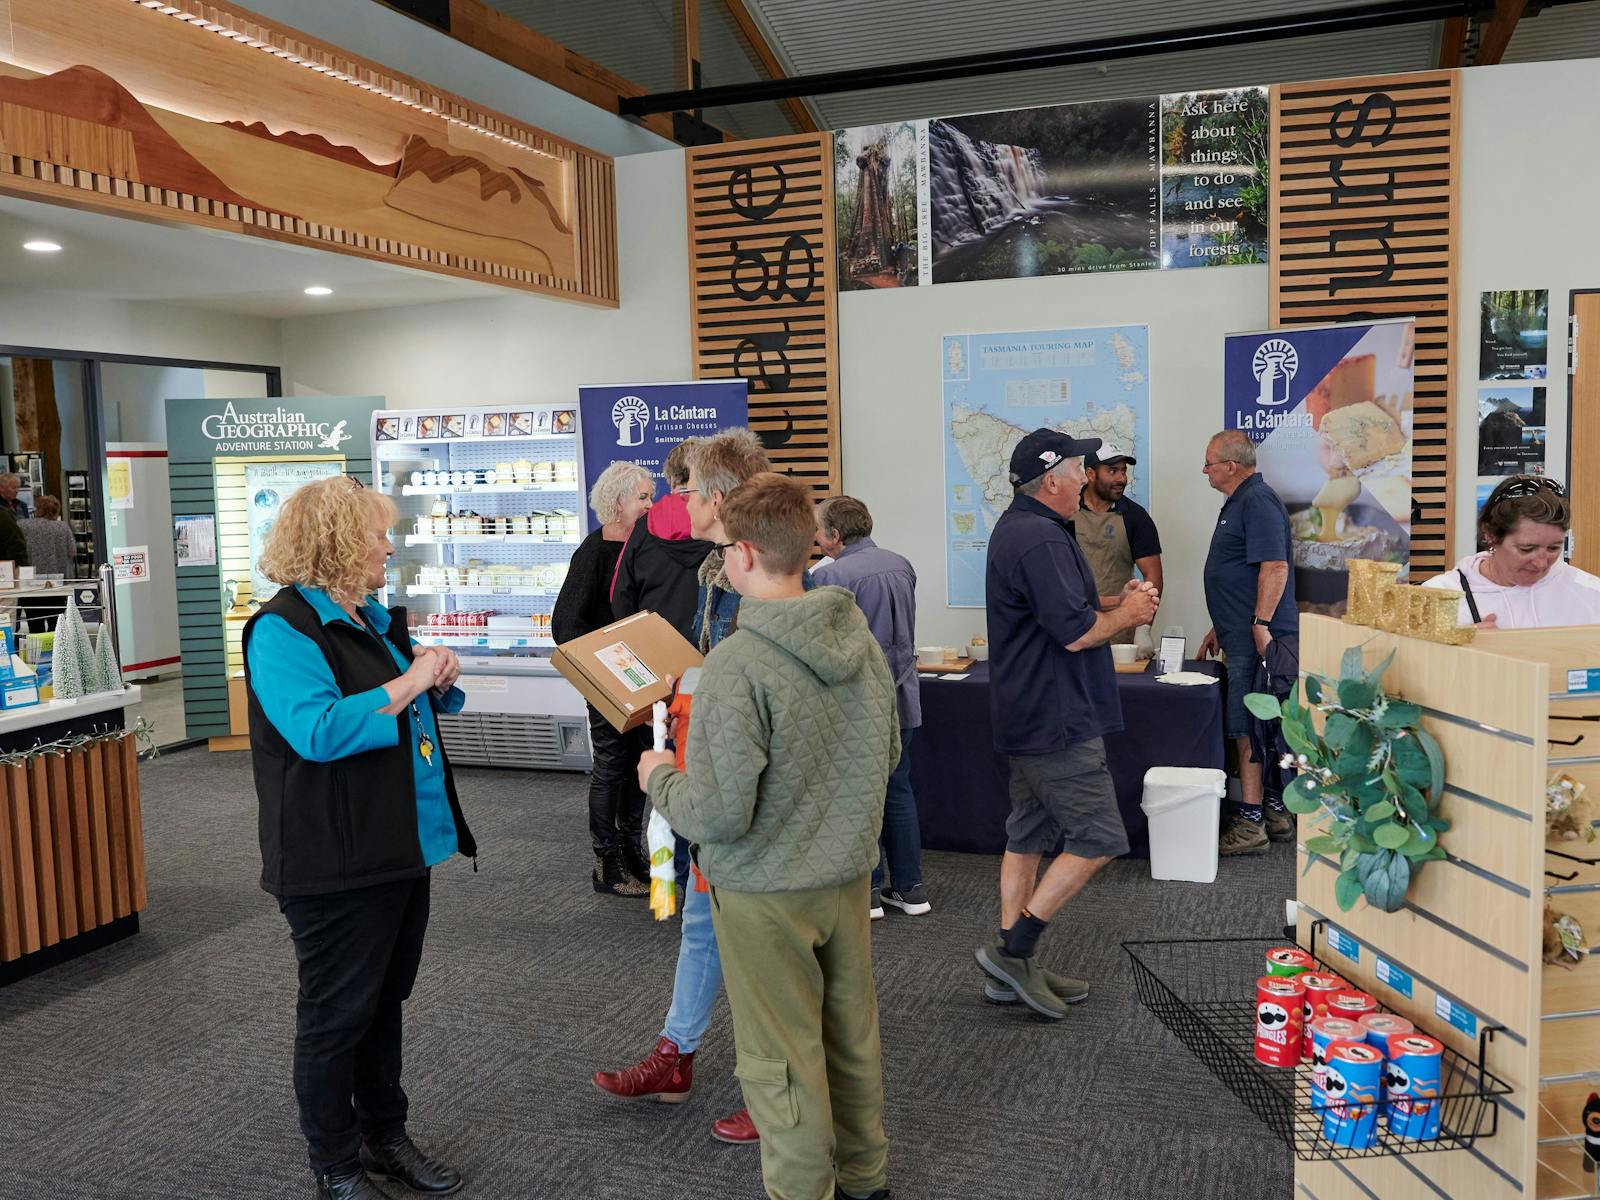 People in the Smithton Visitor Information Centre talking and doing a cheese tasting.